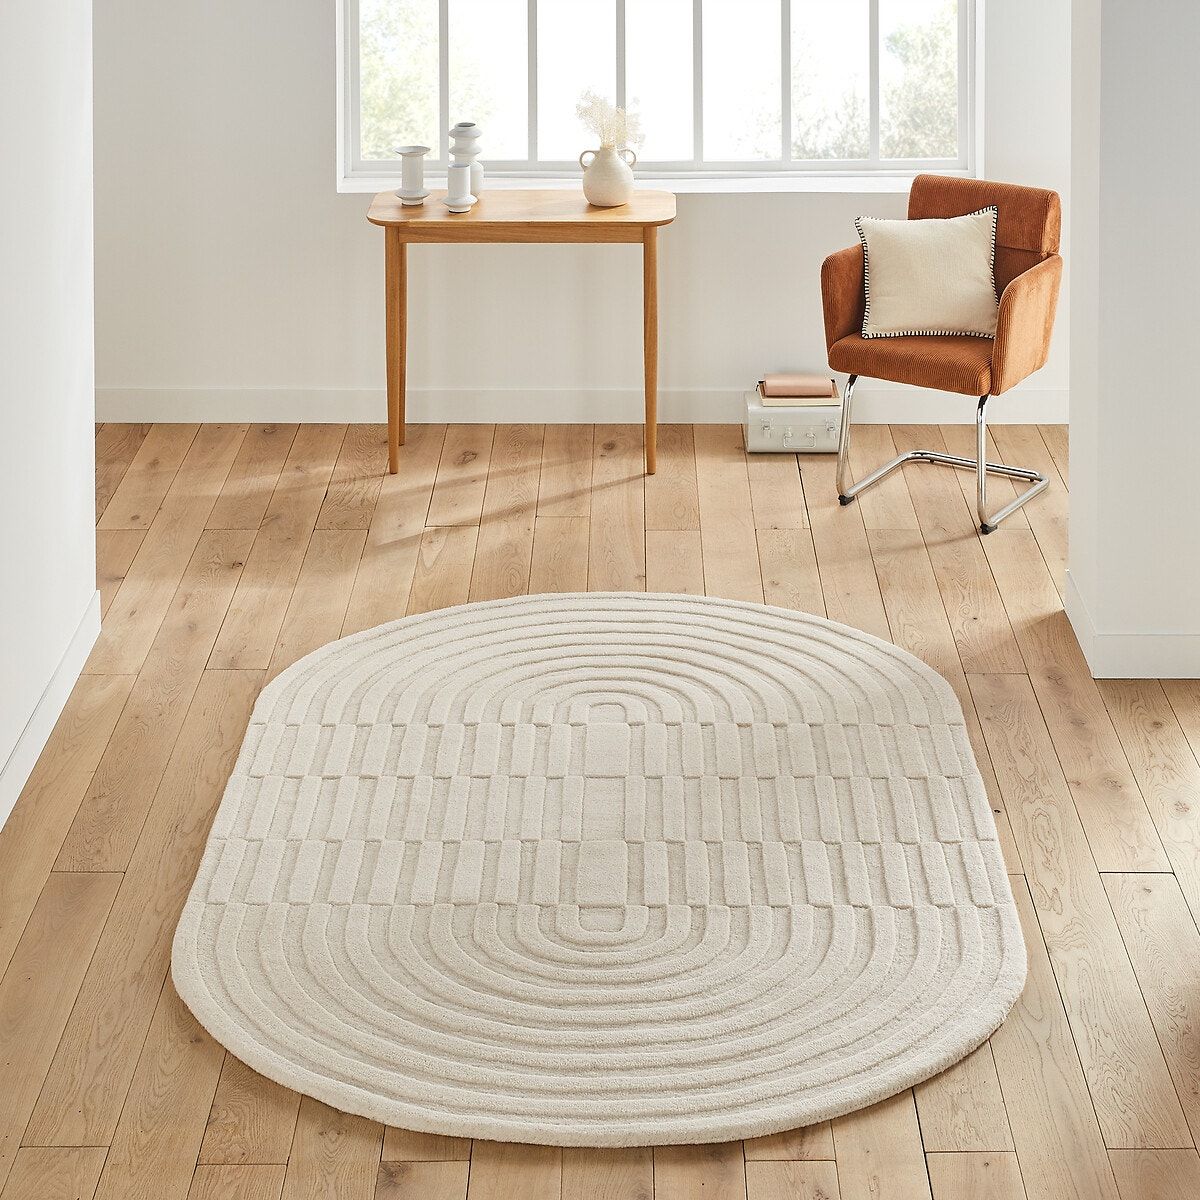 Malko Oval Wool Rug La Redoute Interieurs | La Redoute With Oval Rugs (Photo 10 of 15)